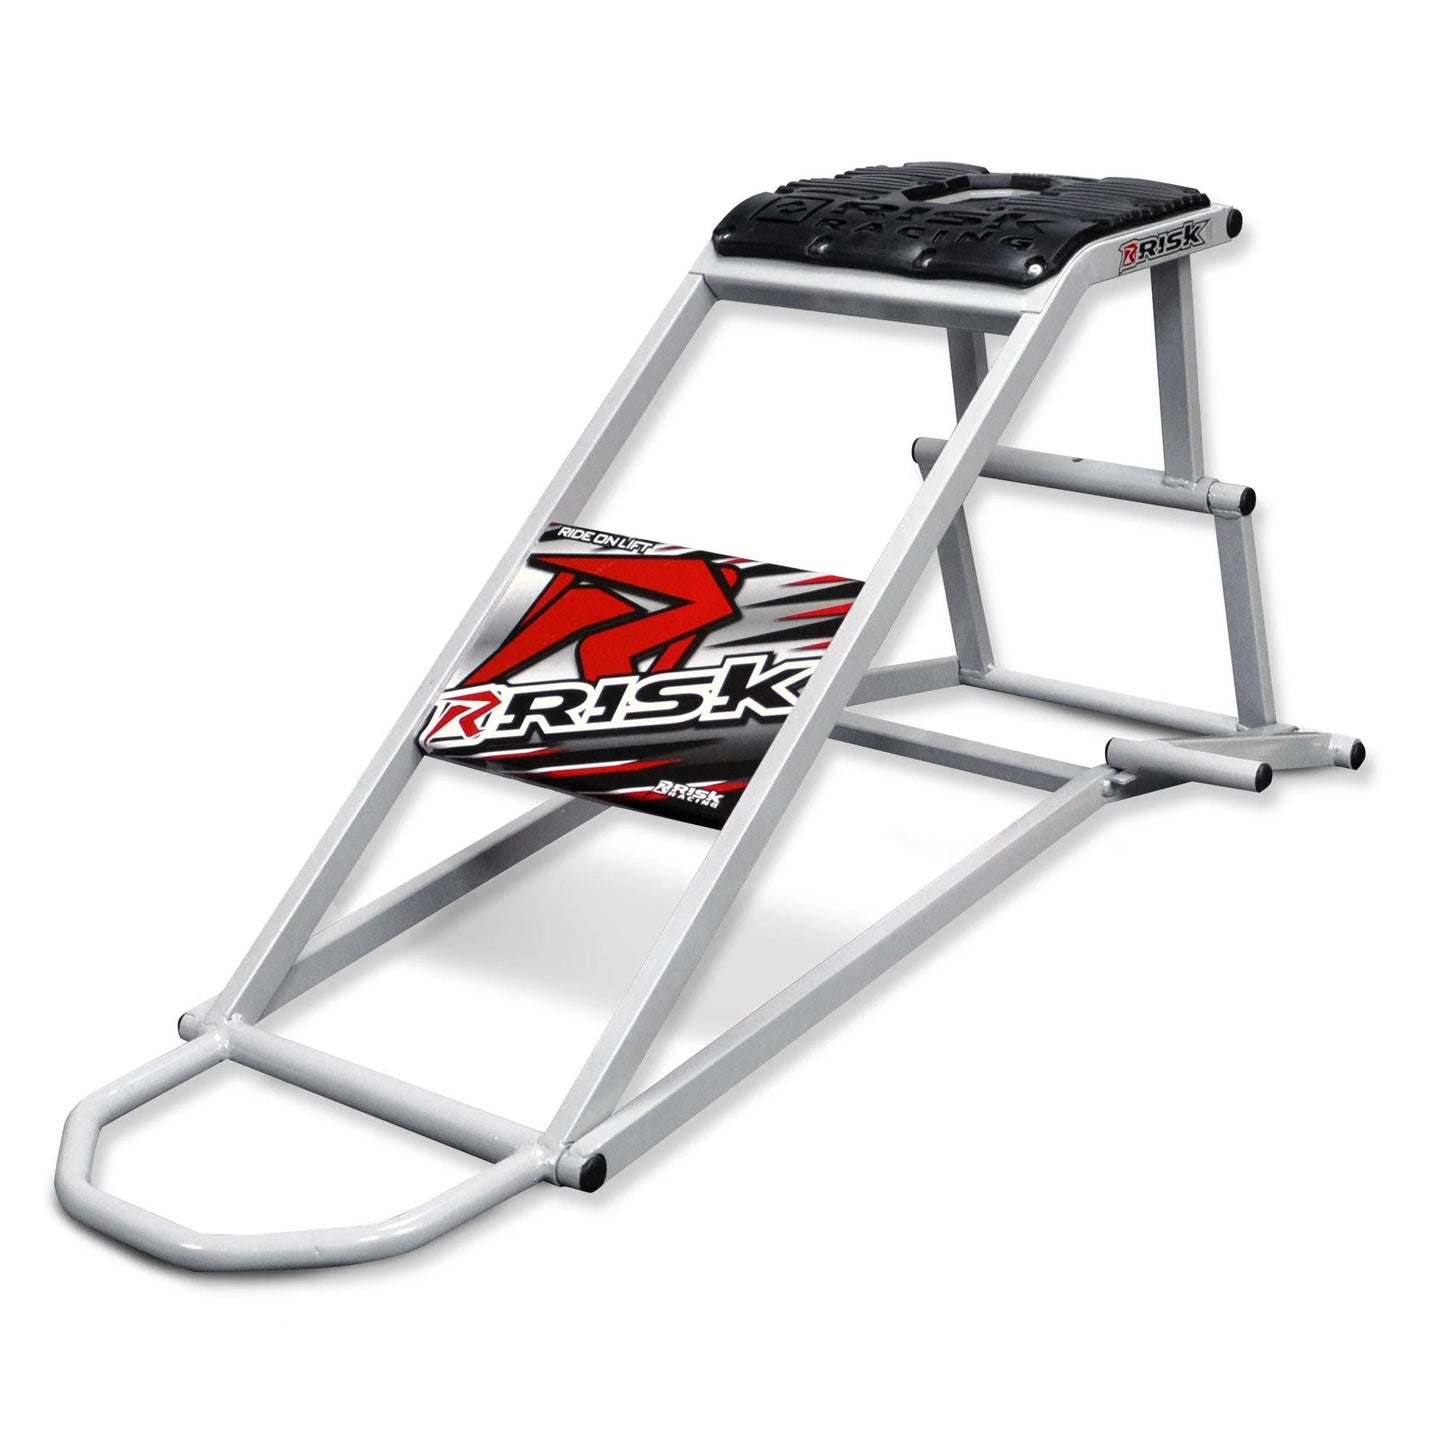 Ride on motocross Lift / Stand RR1